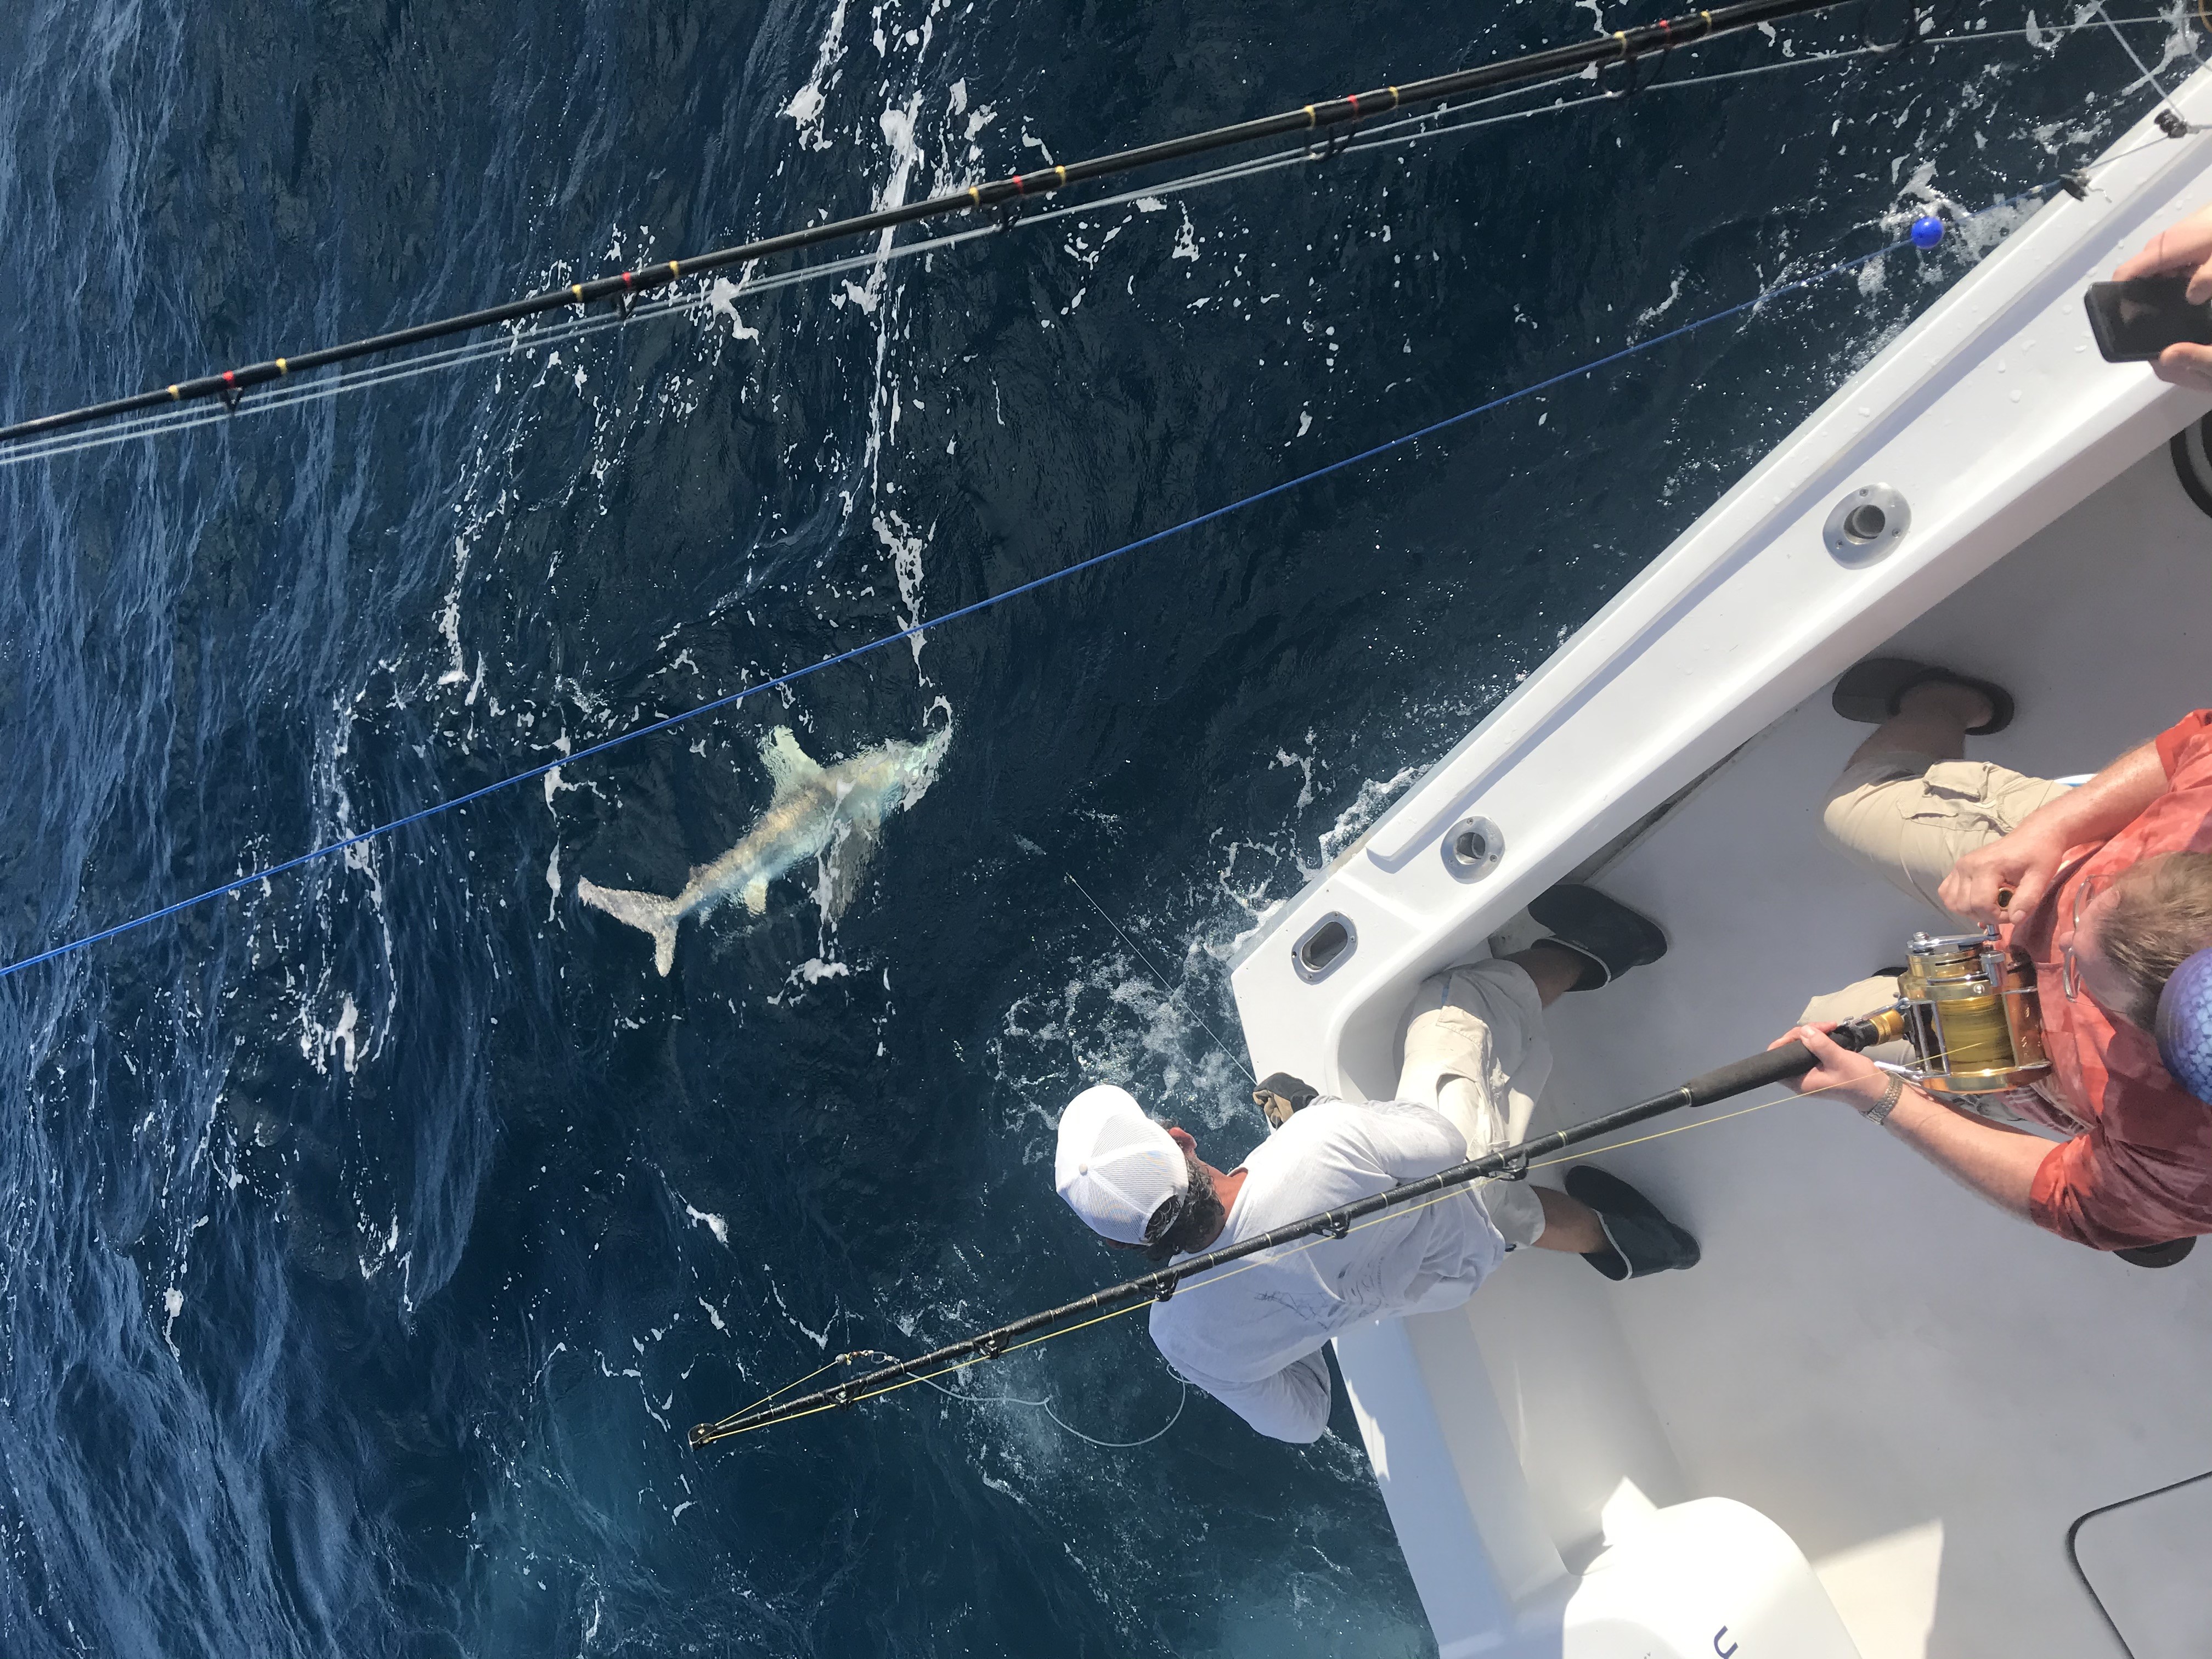 Fishing for sailfish off the coast of Fort Lauderdale